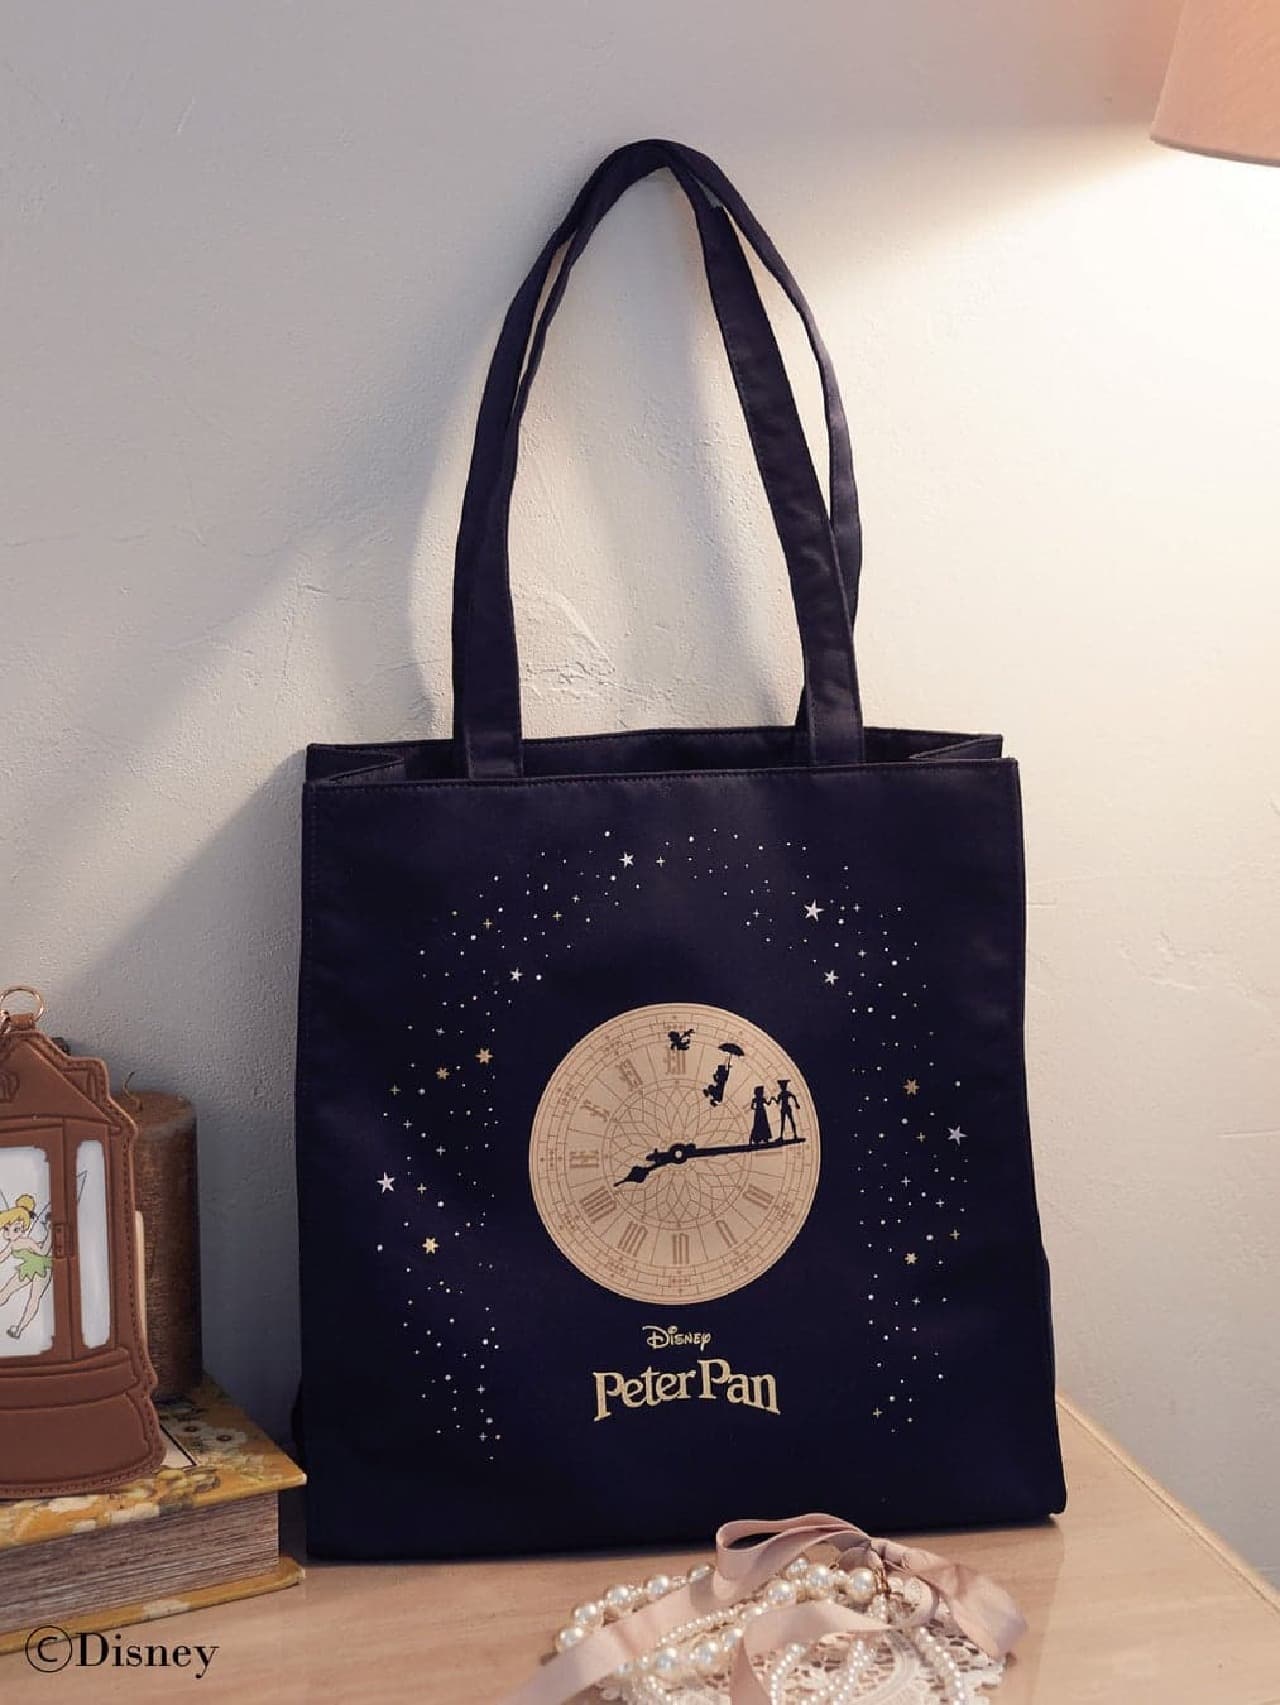 Maison de FLEUR "Peter Pan" collection will be released on March 15th! Available in 5 types, from popular tote bags to unique items Image 2